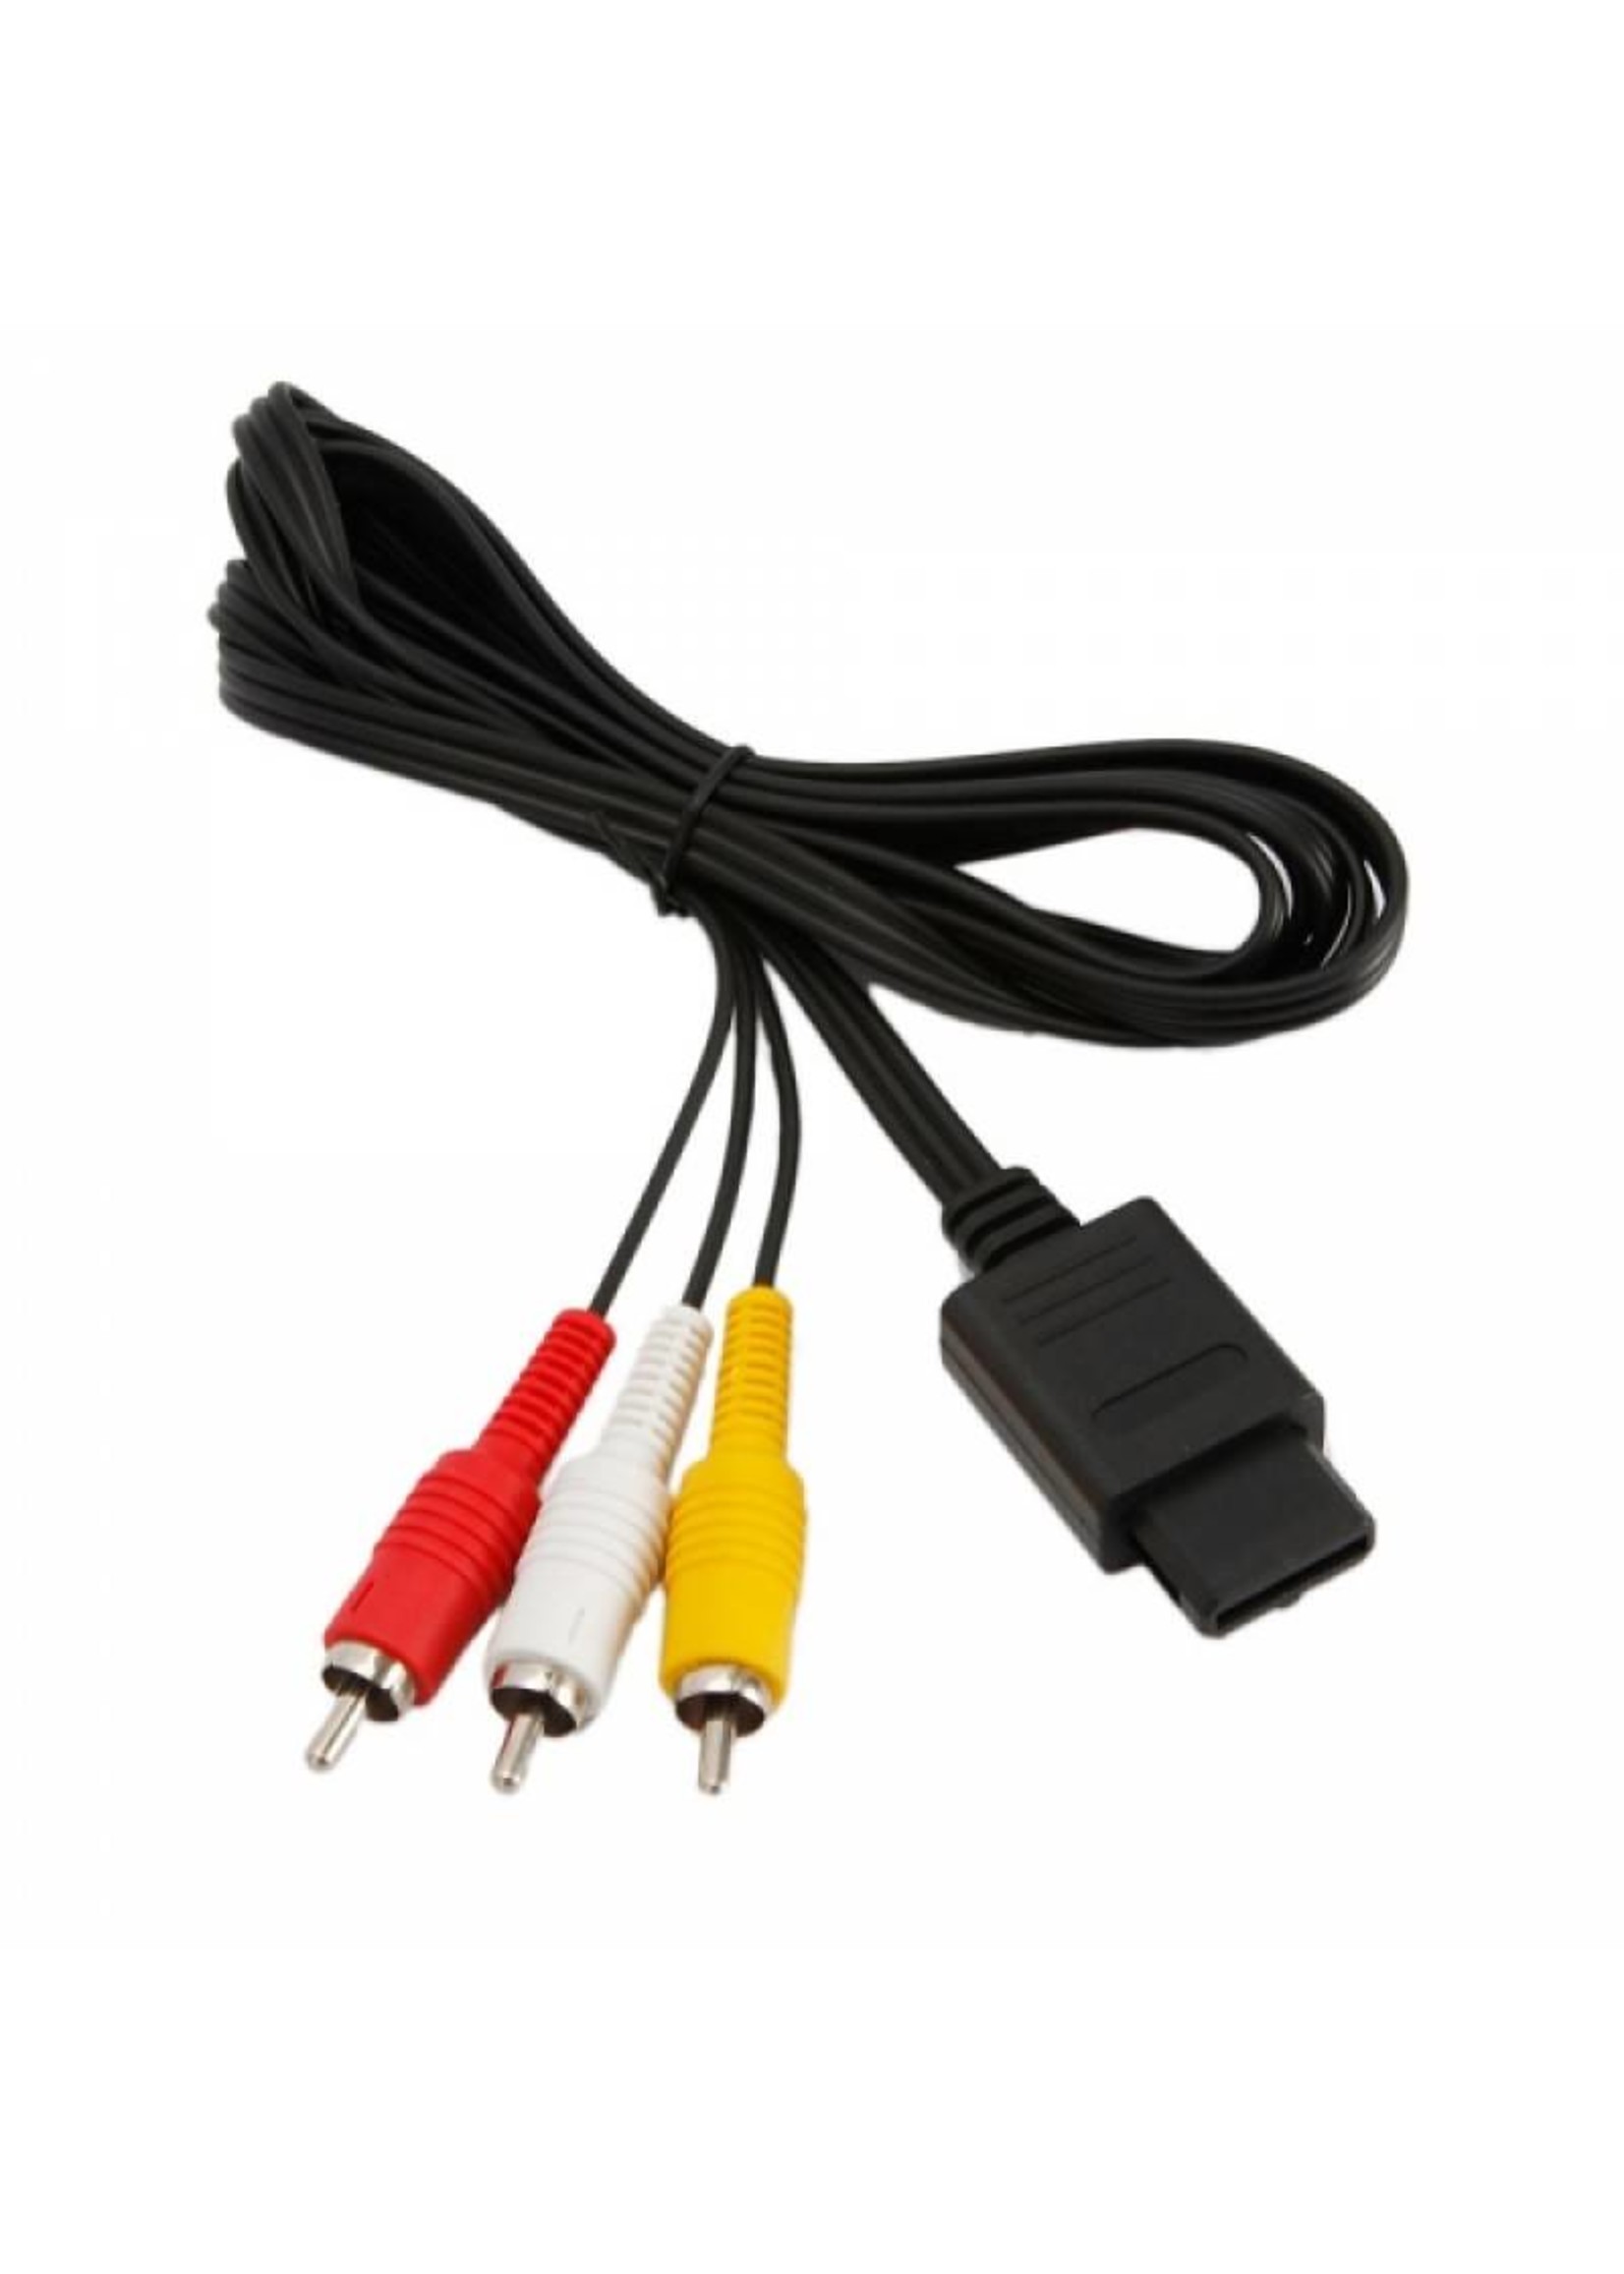 64 / GC AV Cable (used)